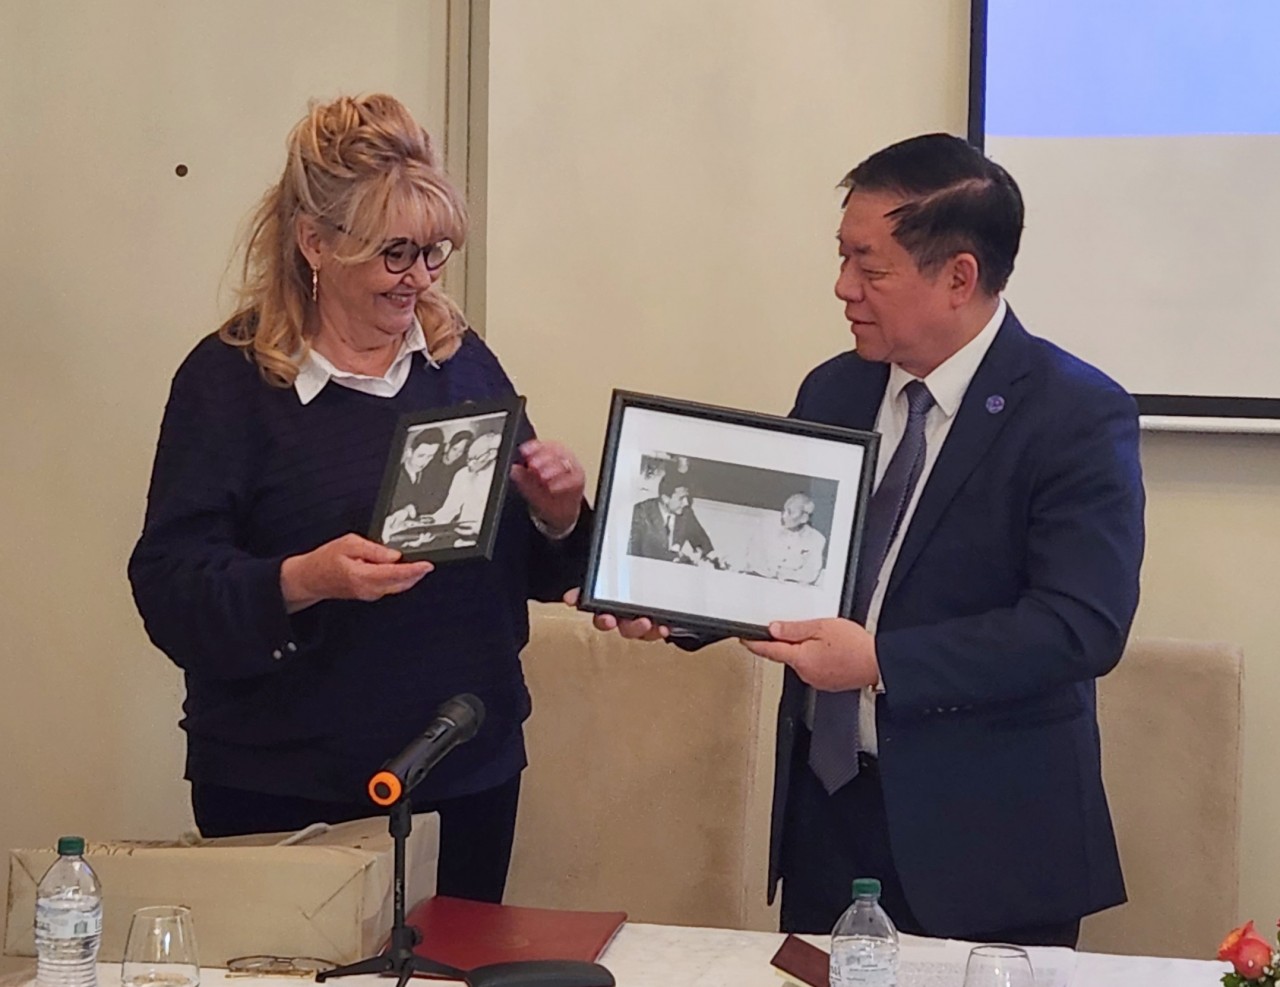 Sandra Scagliotti, Honorary Consul R.S. Vietnam, Friendship Medal - The President of the Center for Vietnamese Studies sent pictures of President Ho Chi Minh in Italy.